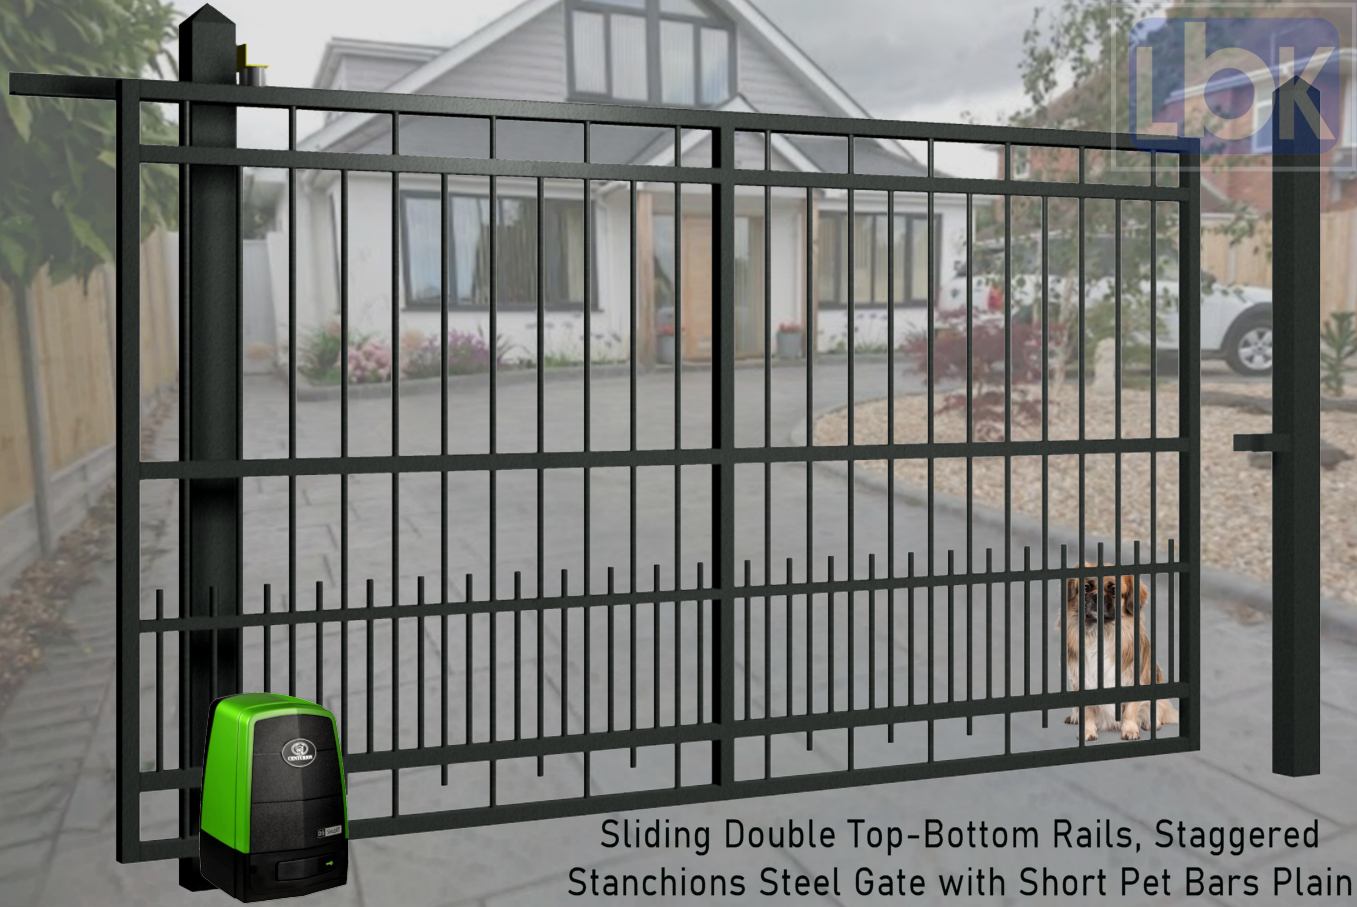 05c Sliding Double Top-Bottom Rails, Staggered Stanchions Steel Gate with Short Pet Bars Plain